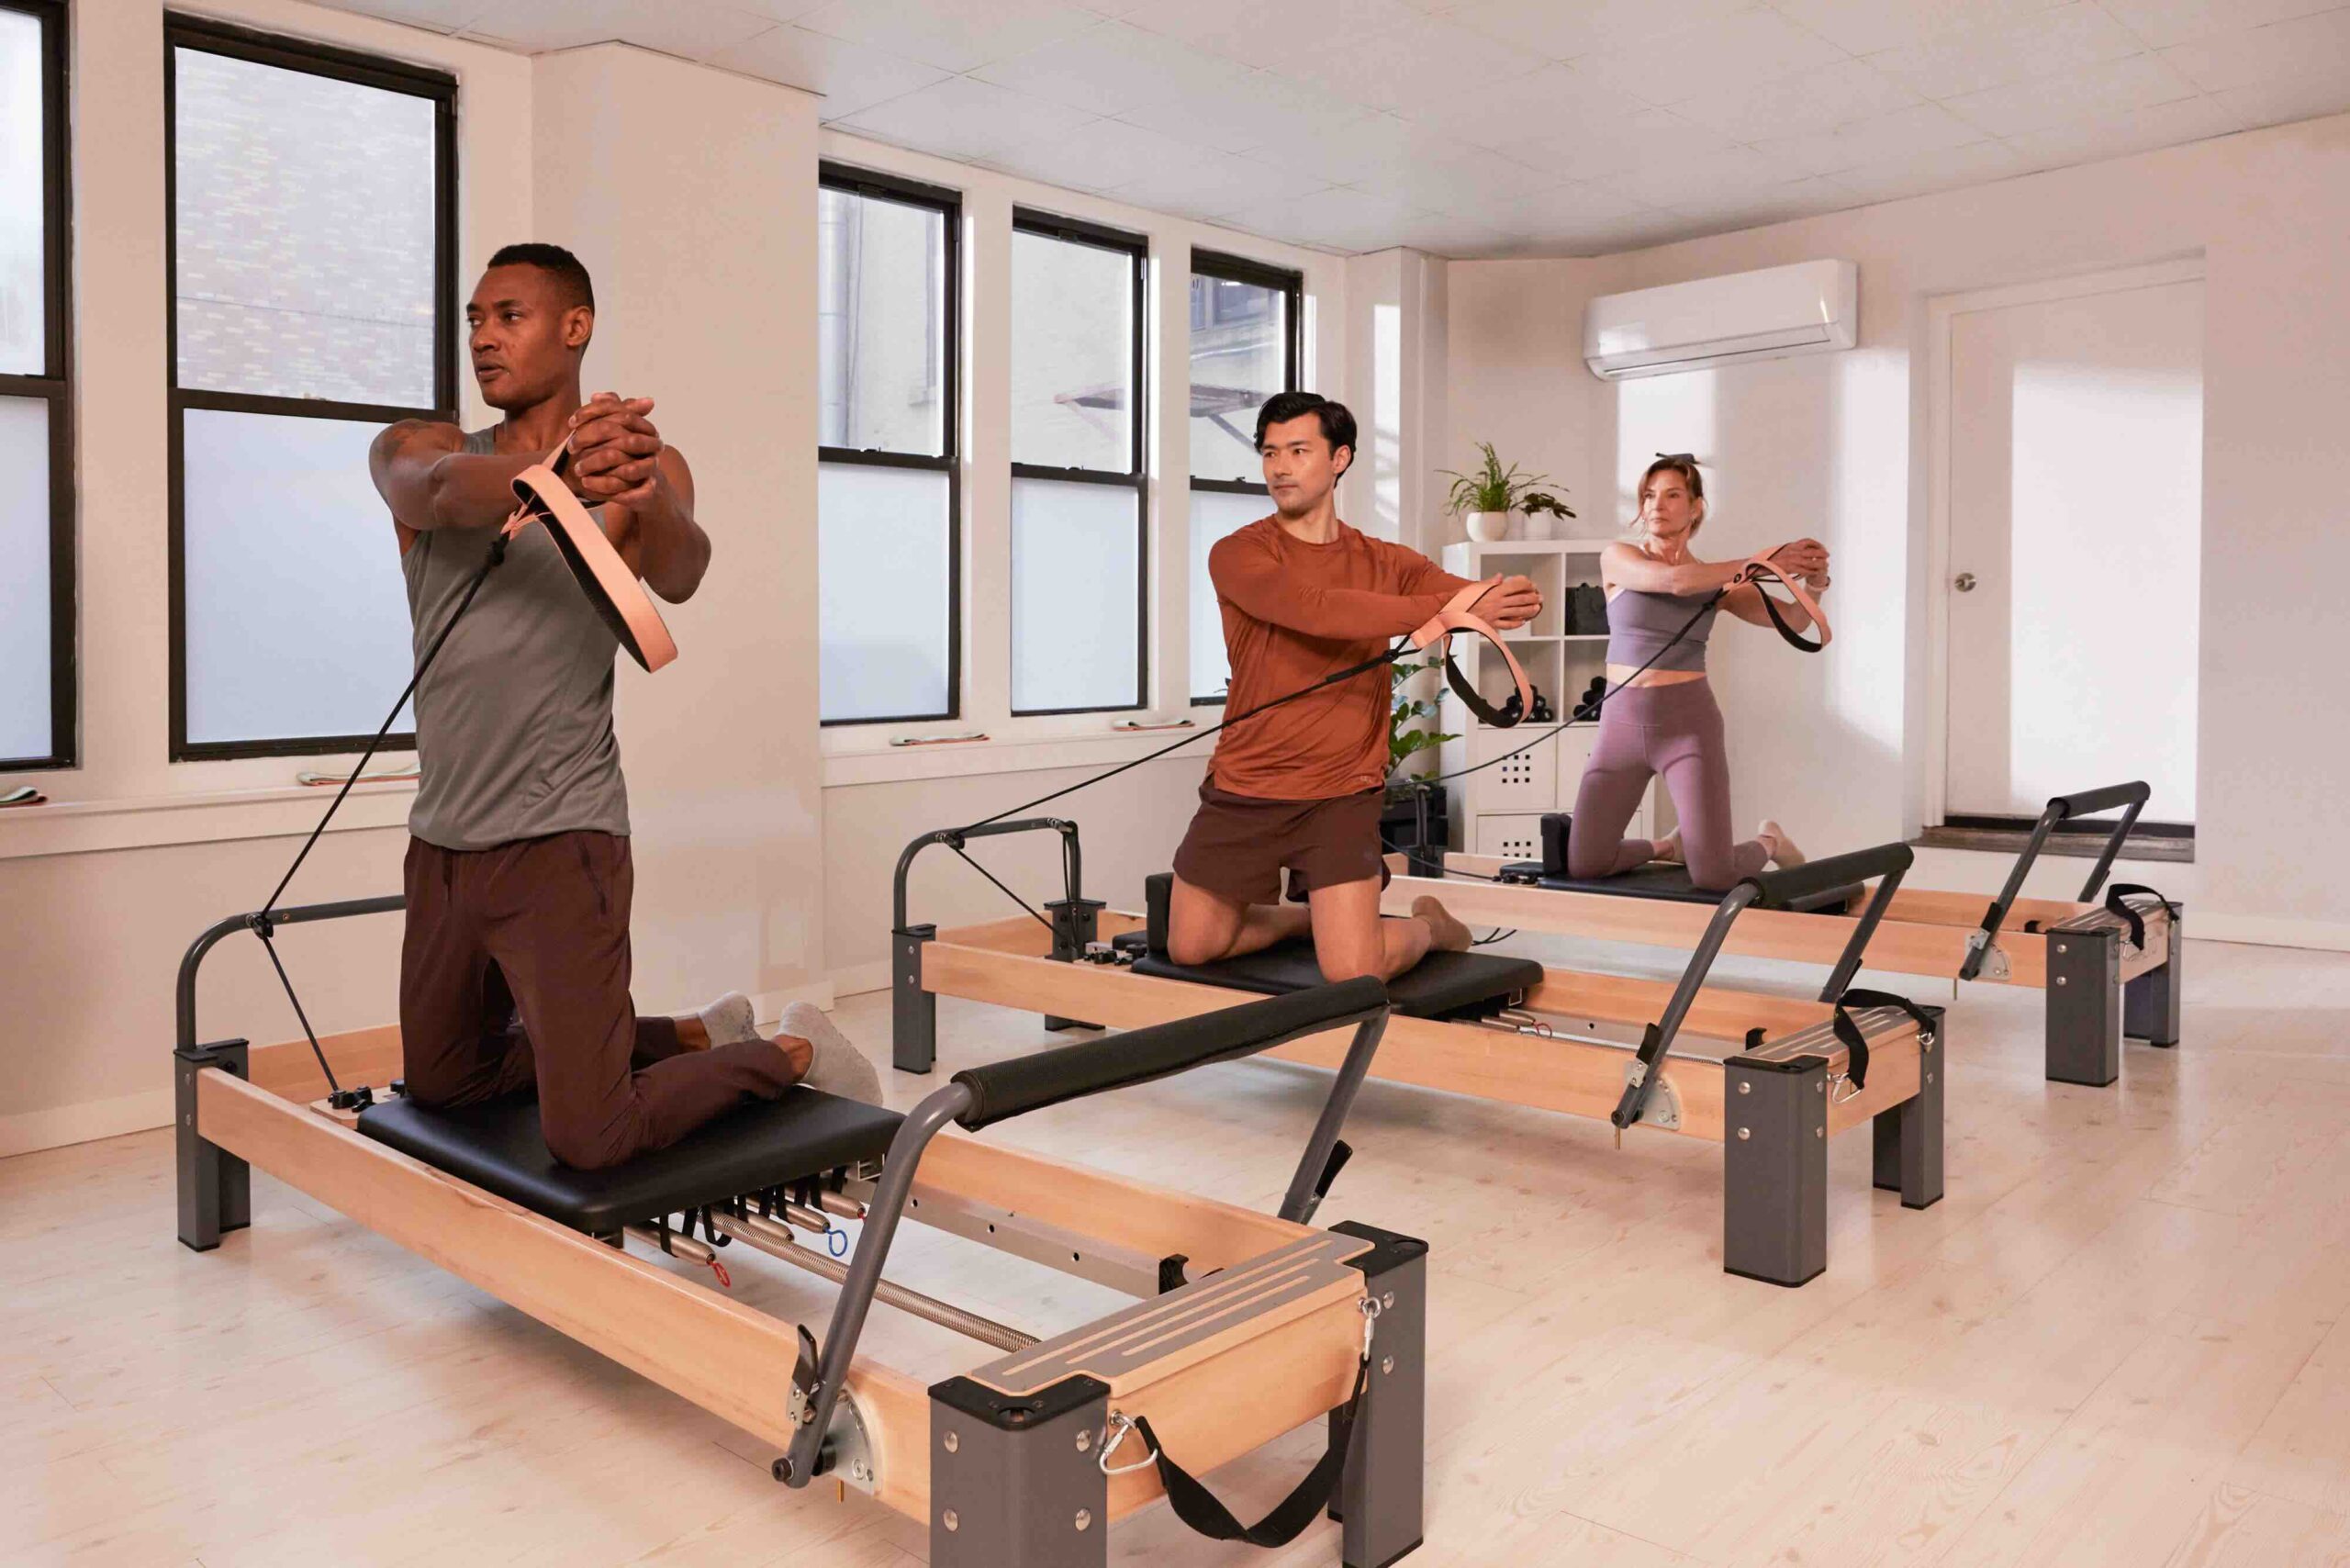 What To Wear For Reformer Pilates Classes